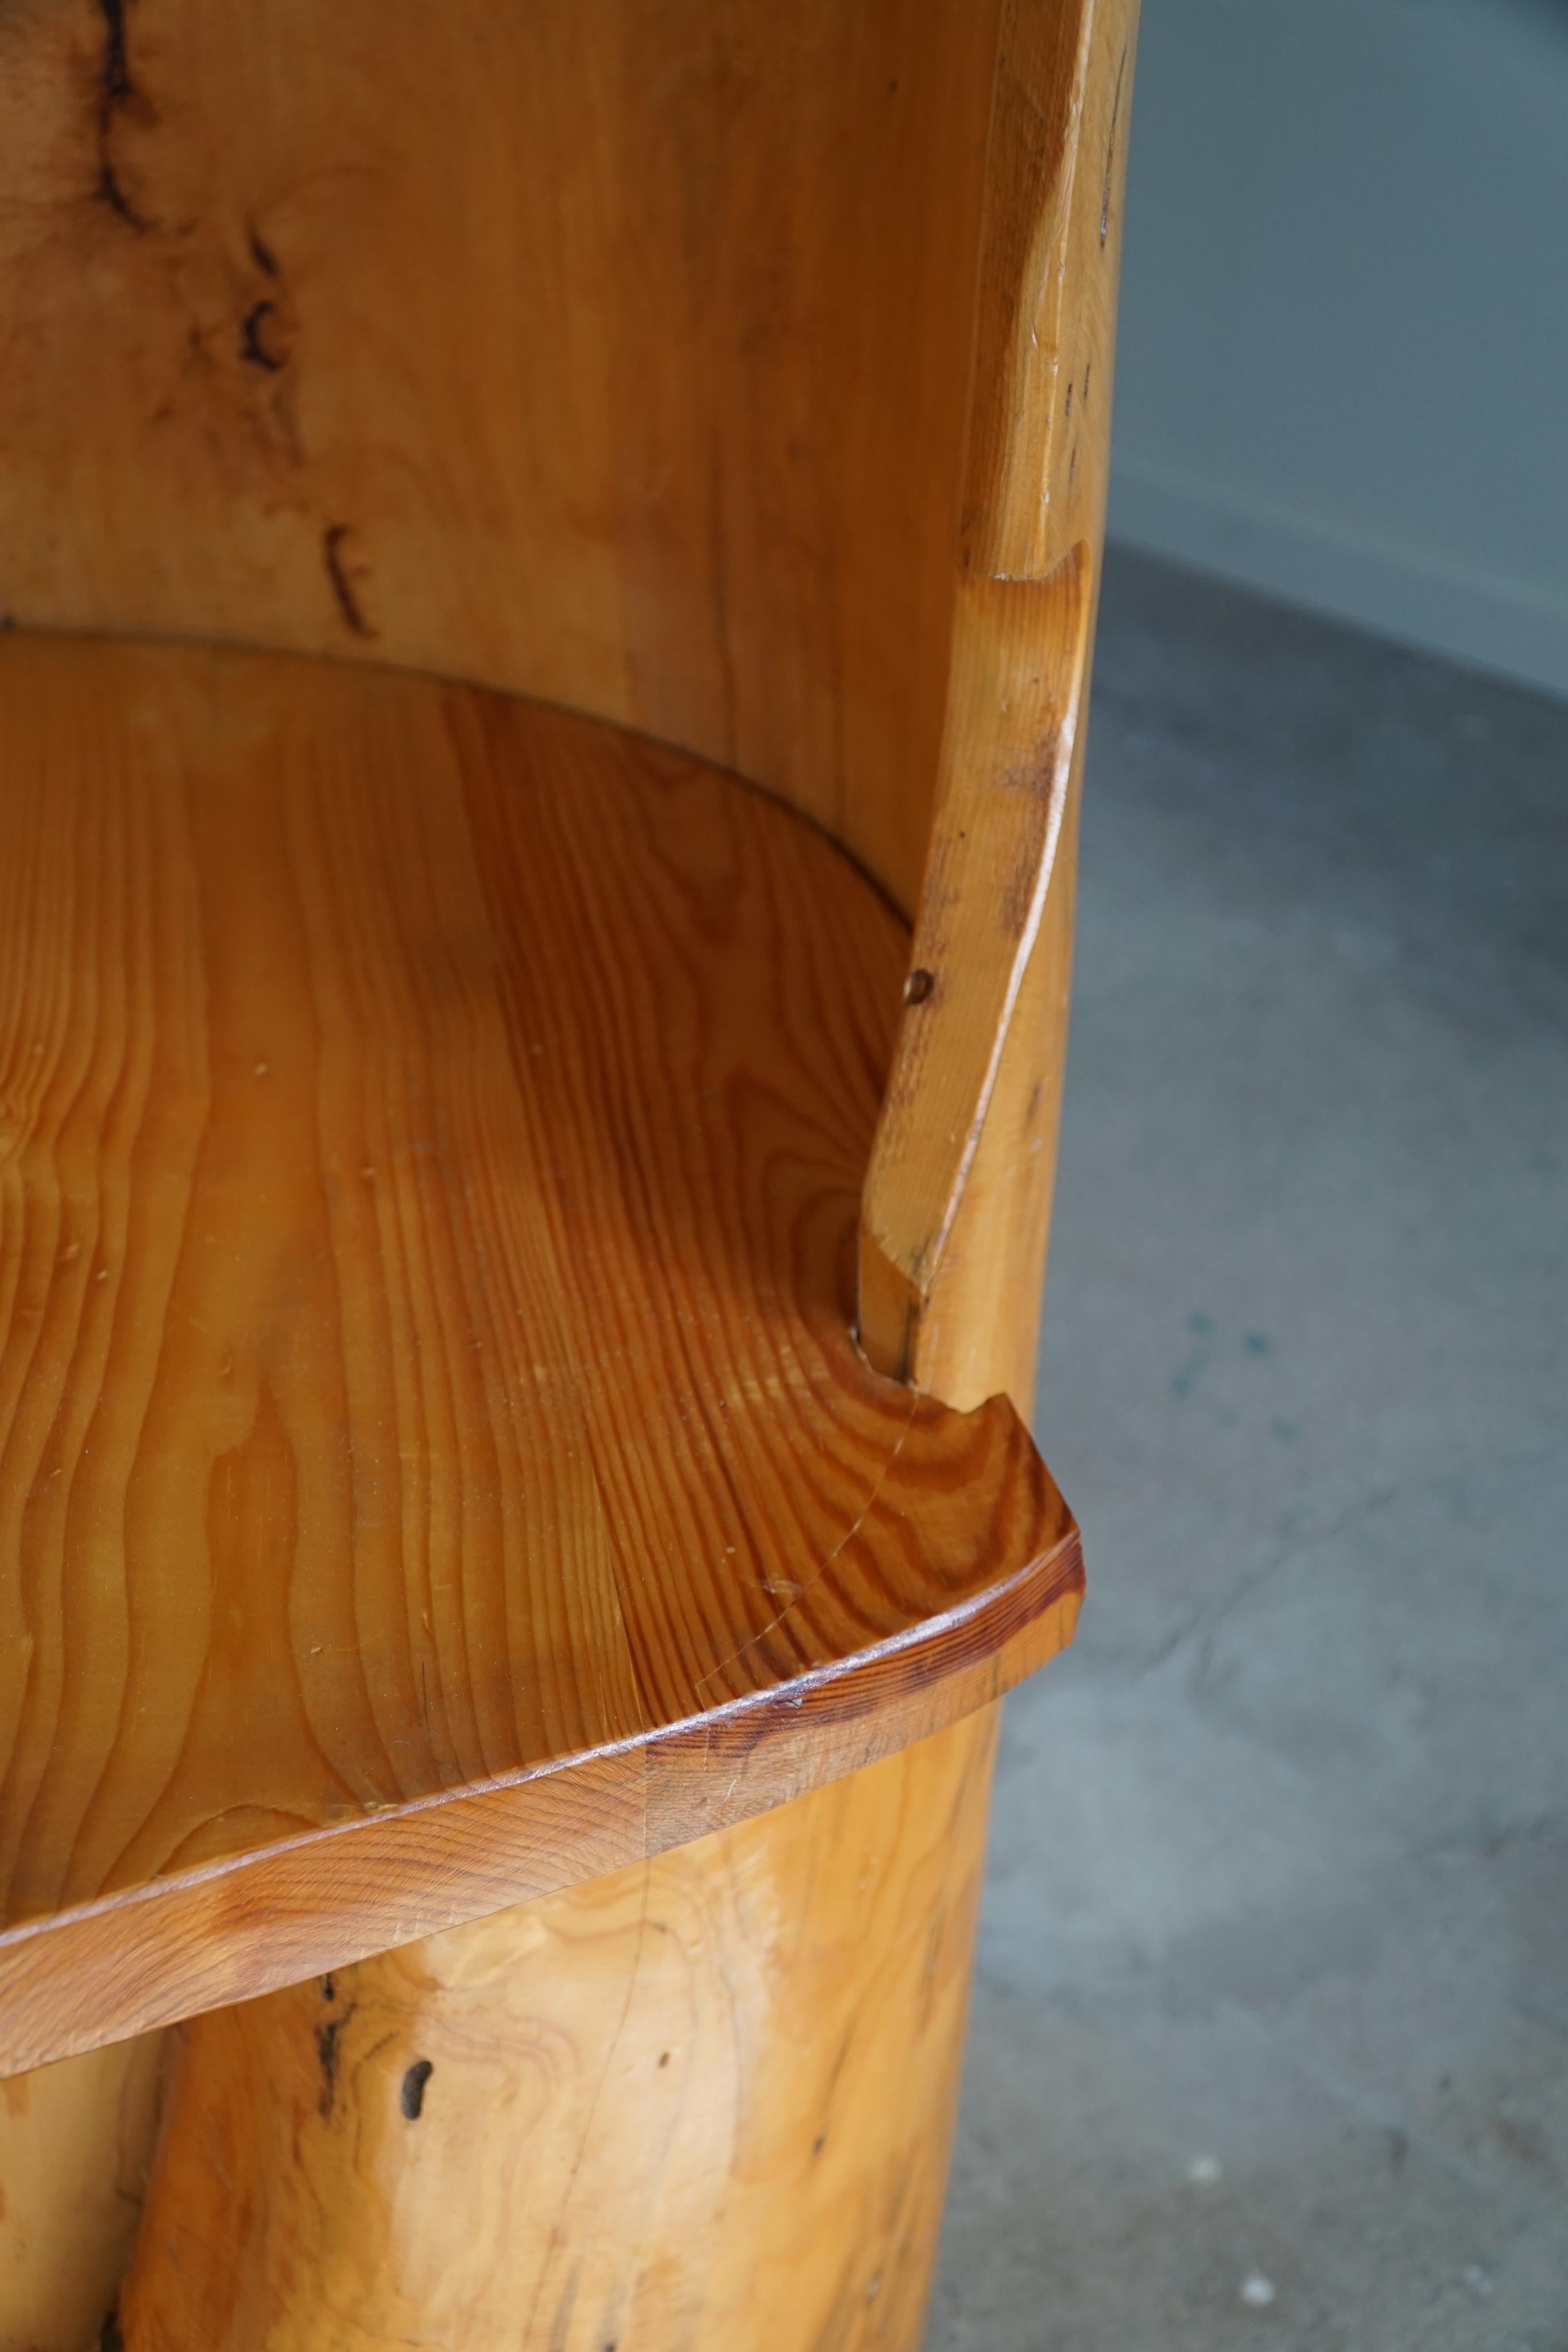 20th Century Stump Chair in Solid Birch by a Swedish Cabinetmaker, Wabi Sabi, 1950s For Sale